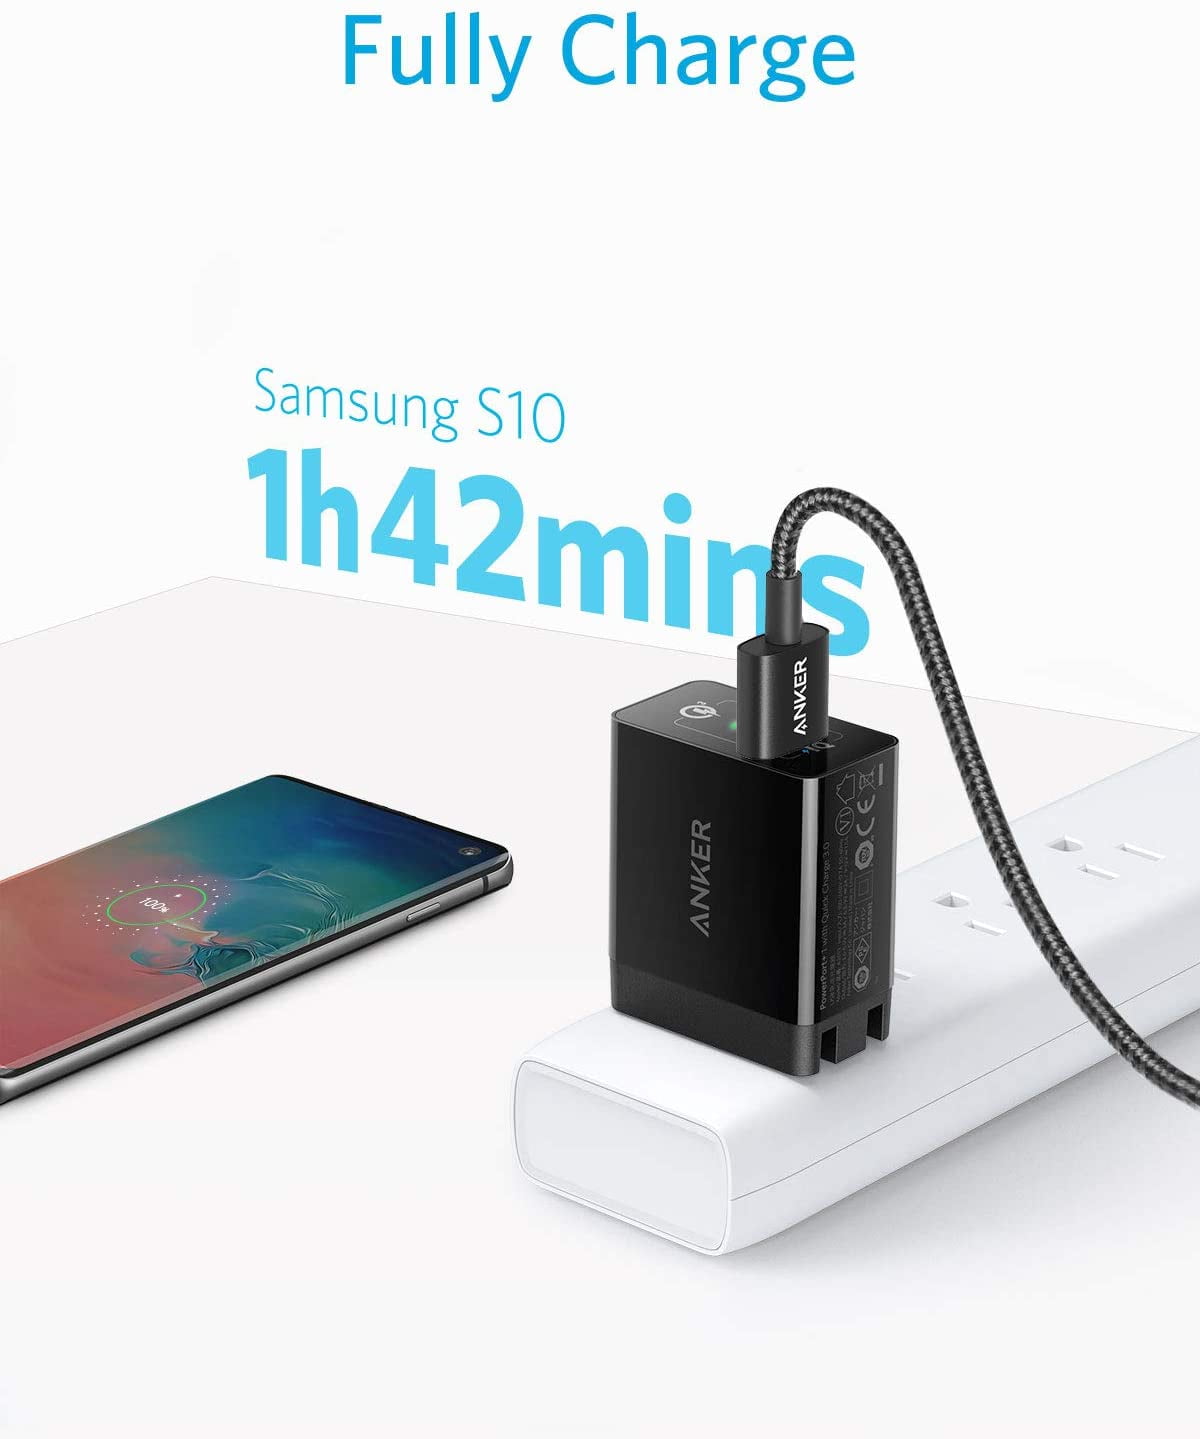 Anker 18W Quick Charge 3.0 USB Wall Charger (Quick Charge 2.0 Compatible)  Powerport+ 1 (USB-A to USB-C Cable Included) 